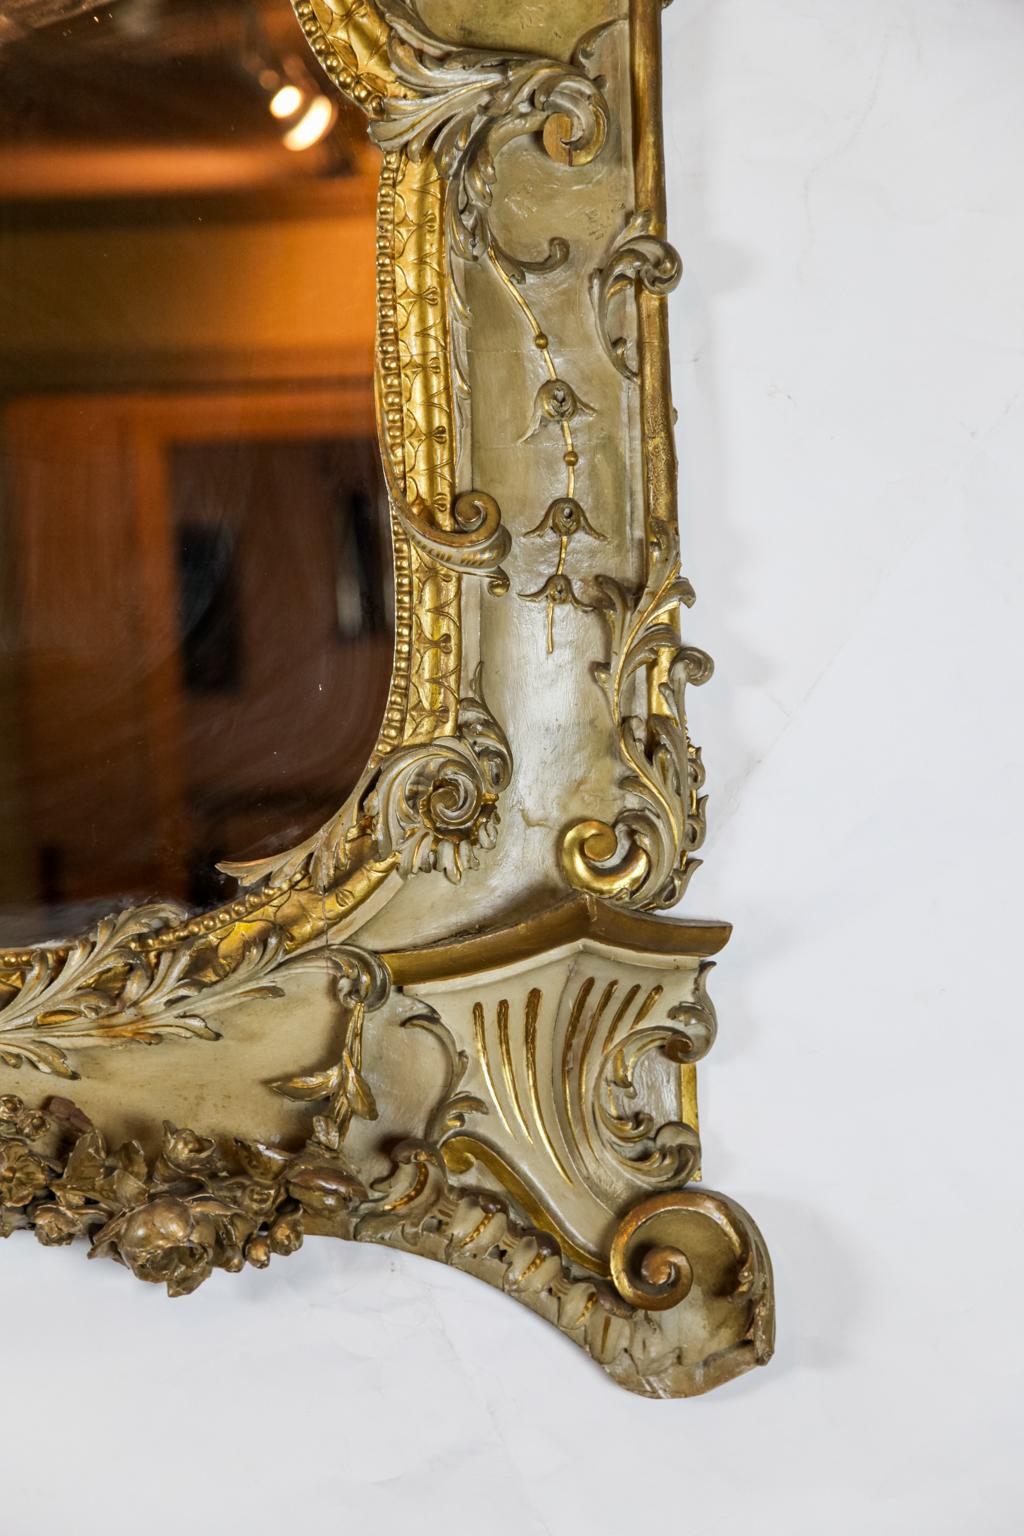 19th century French carved mirror, the horizontal mirror surrounded by carved arabesques and foliate in relief, with central stylized central shell motif, gilded accenting throughout.